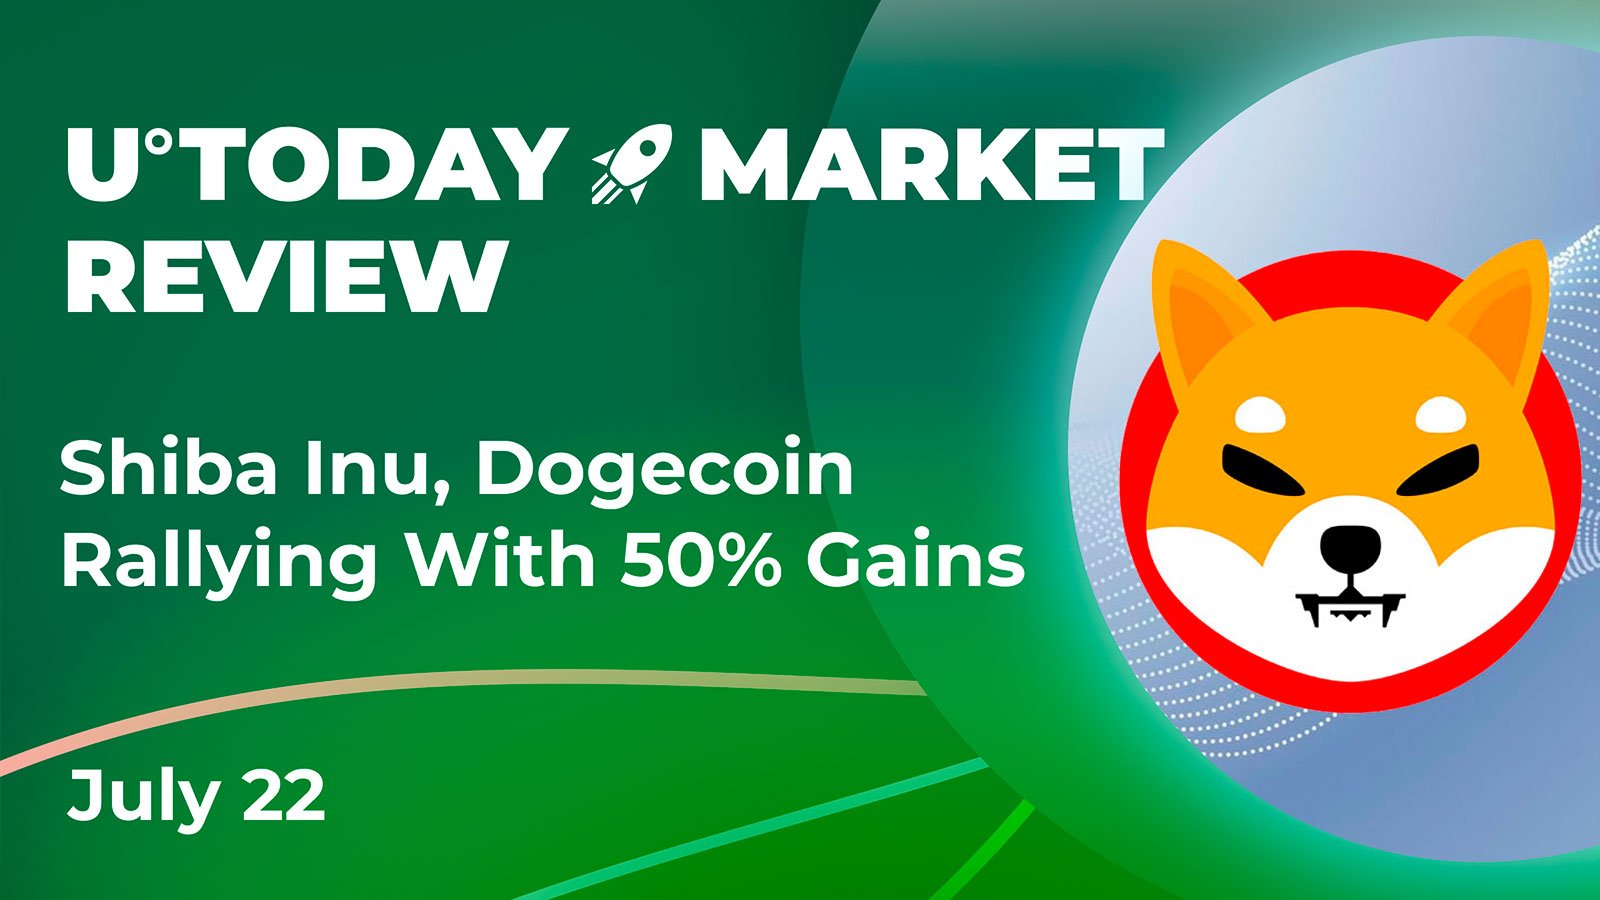 Shiba Inu, Dogecoin Rallying with 50% Gains, Network Activity on Rise: Crypto Market Review, July 22